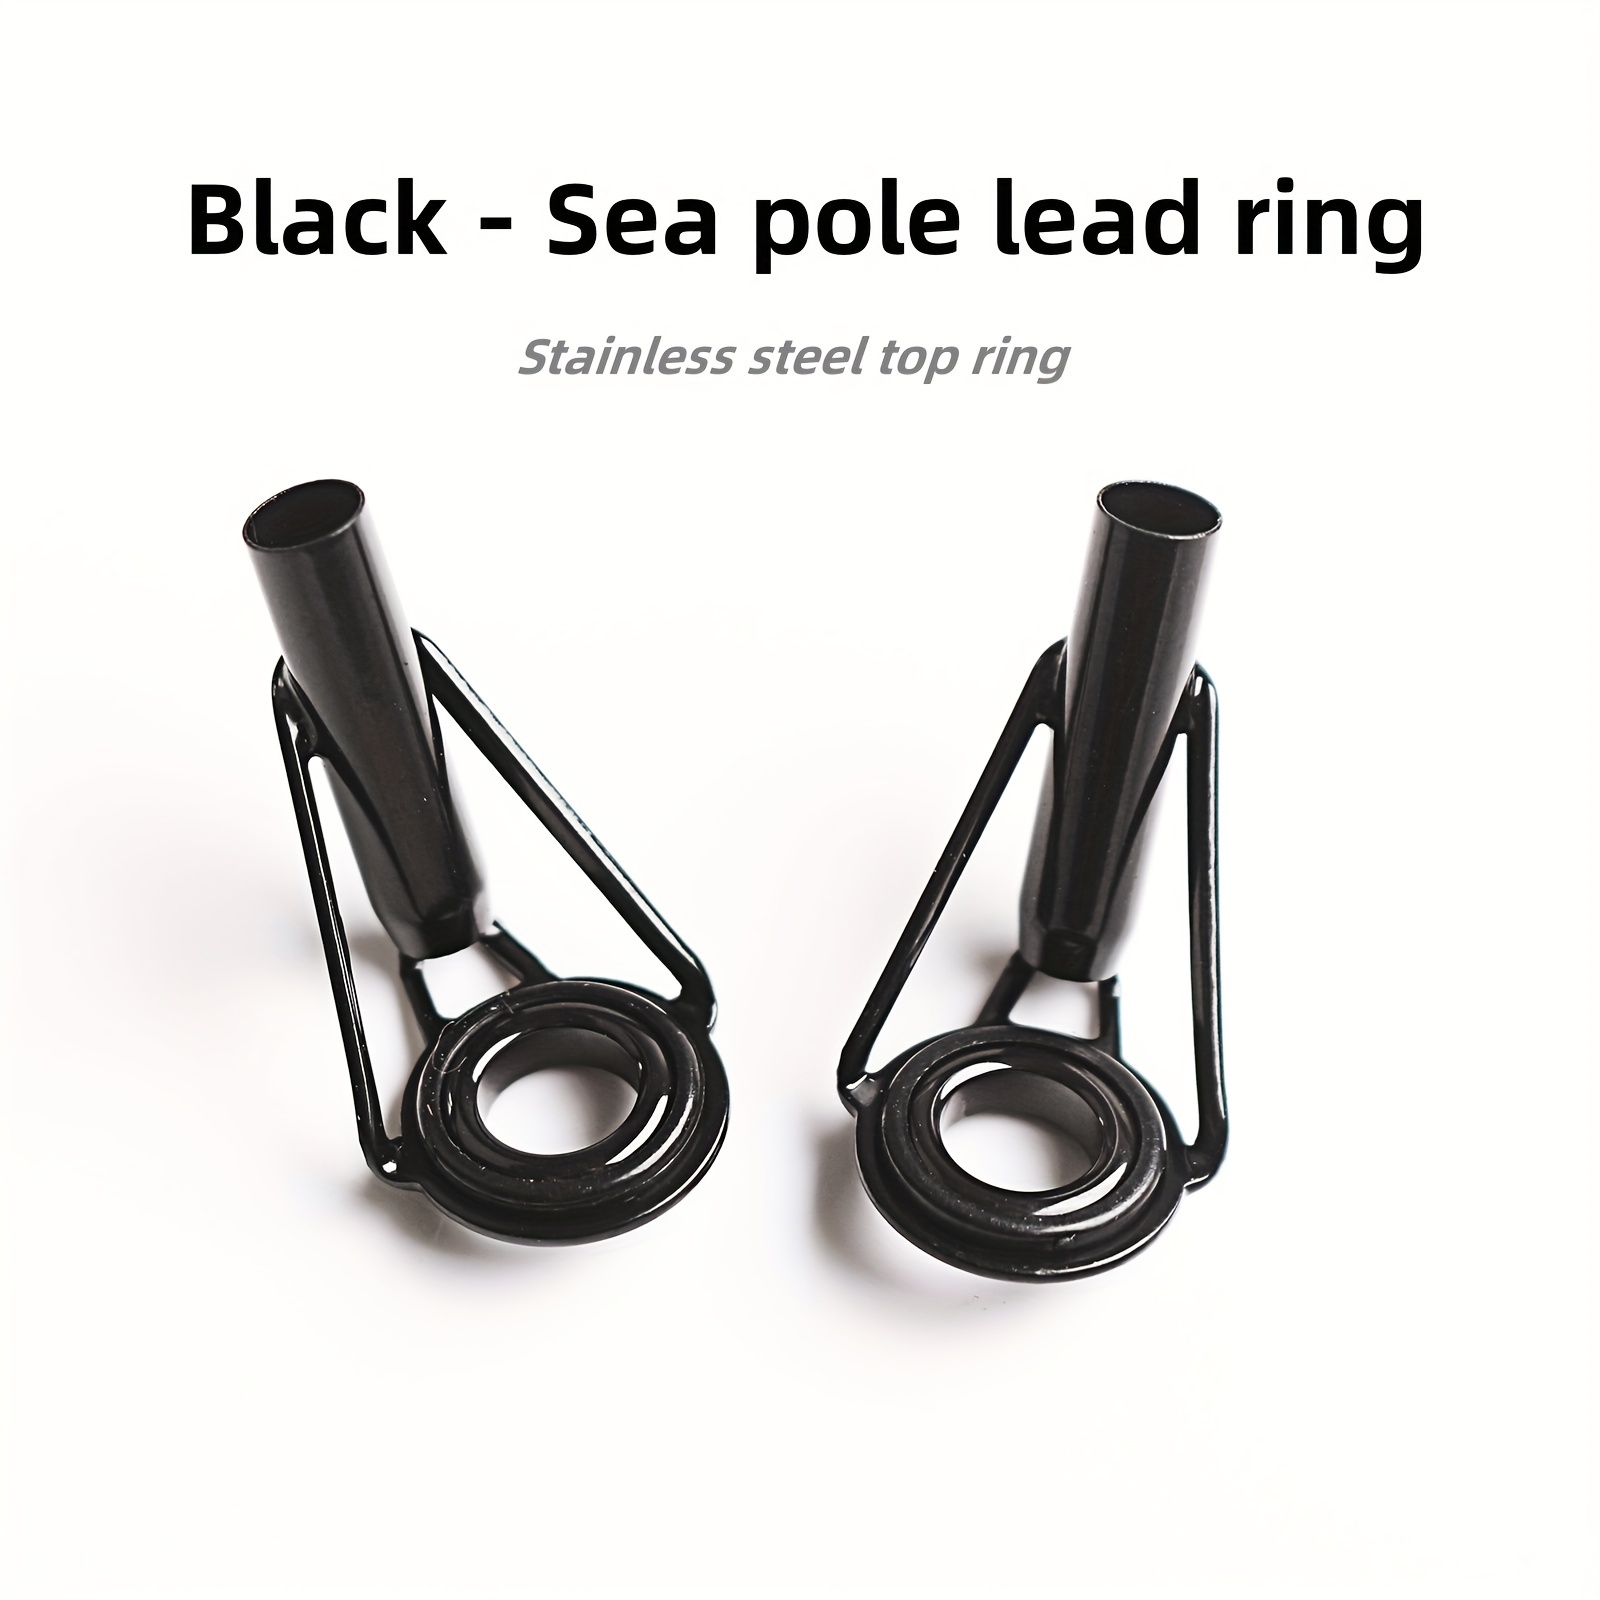 Buy JUNMEIDO 35 PCS Fishing Rod Rings Stainless Steel+Ceramic Fishing Rod  Tip Ring Fishing Rod Repair Kit with Box for Fish Pole Ring Eye Guides (7  Sizes of 2.2mm/2.4mm/2.6mm/2.8mm/3.0mm/3.5mm/4.0mm) Online at  desertcartDenmark